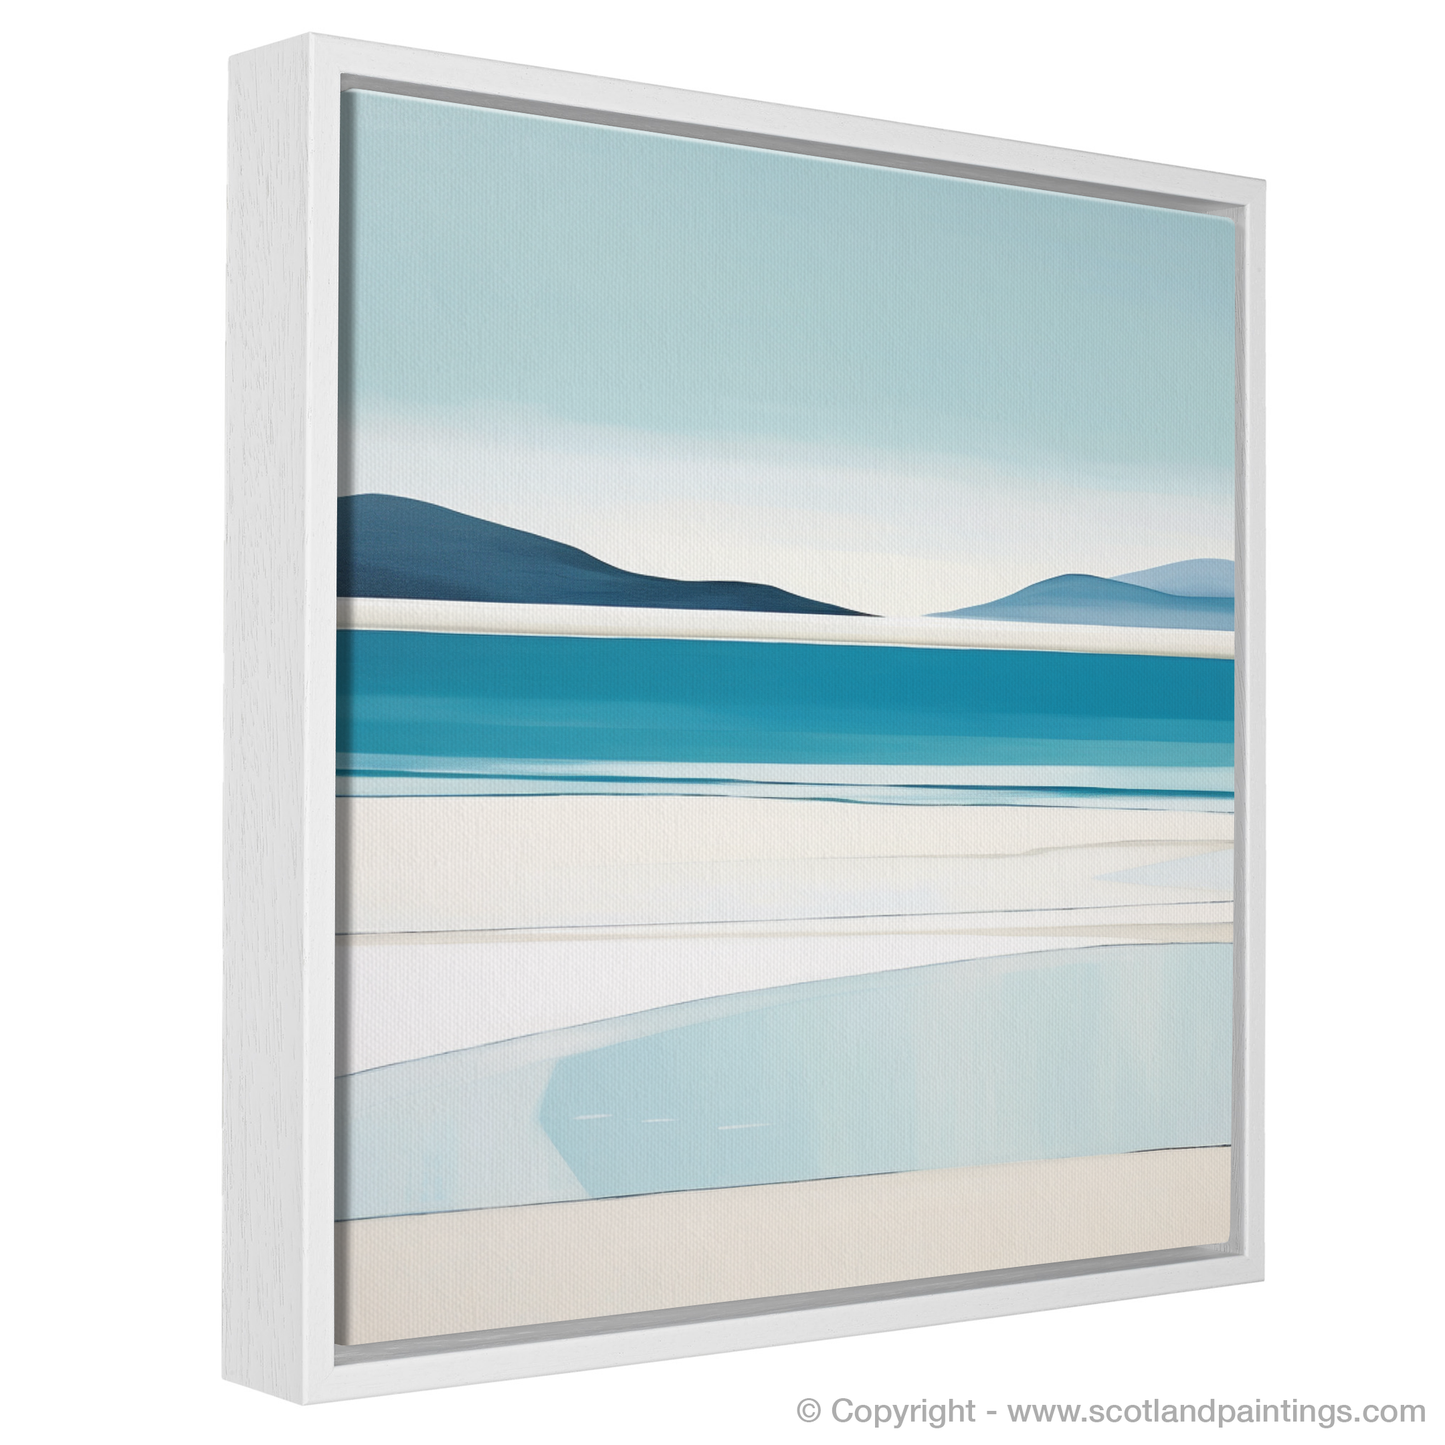 Painting and Art Print of Luskentyre Beach, Isle of Harris entitled "Serene Shores of Luskentyre: A Minimalist Ode to Scottish Beaches".